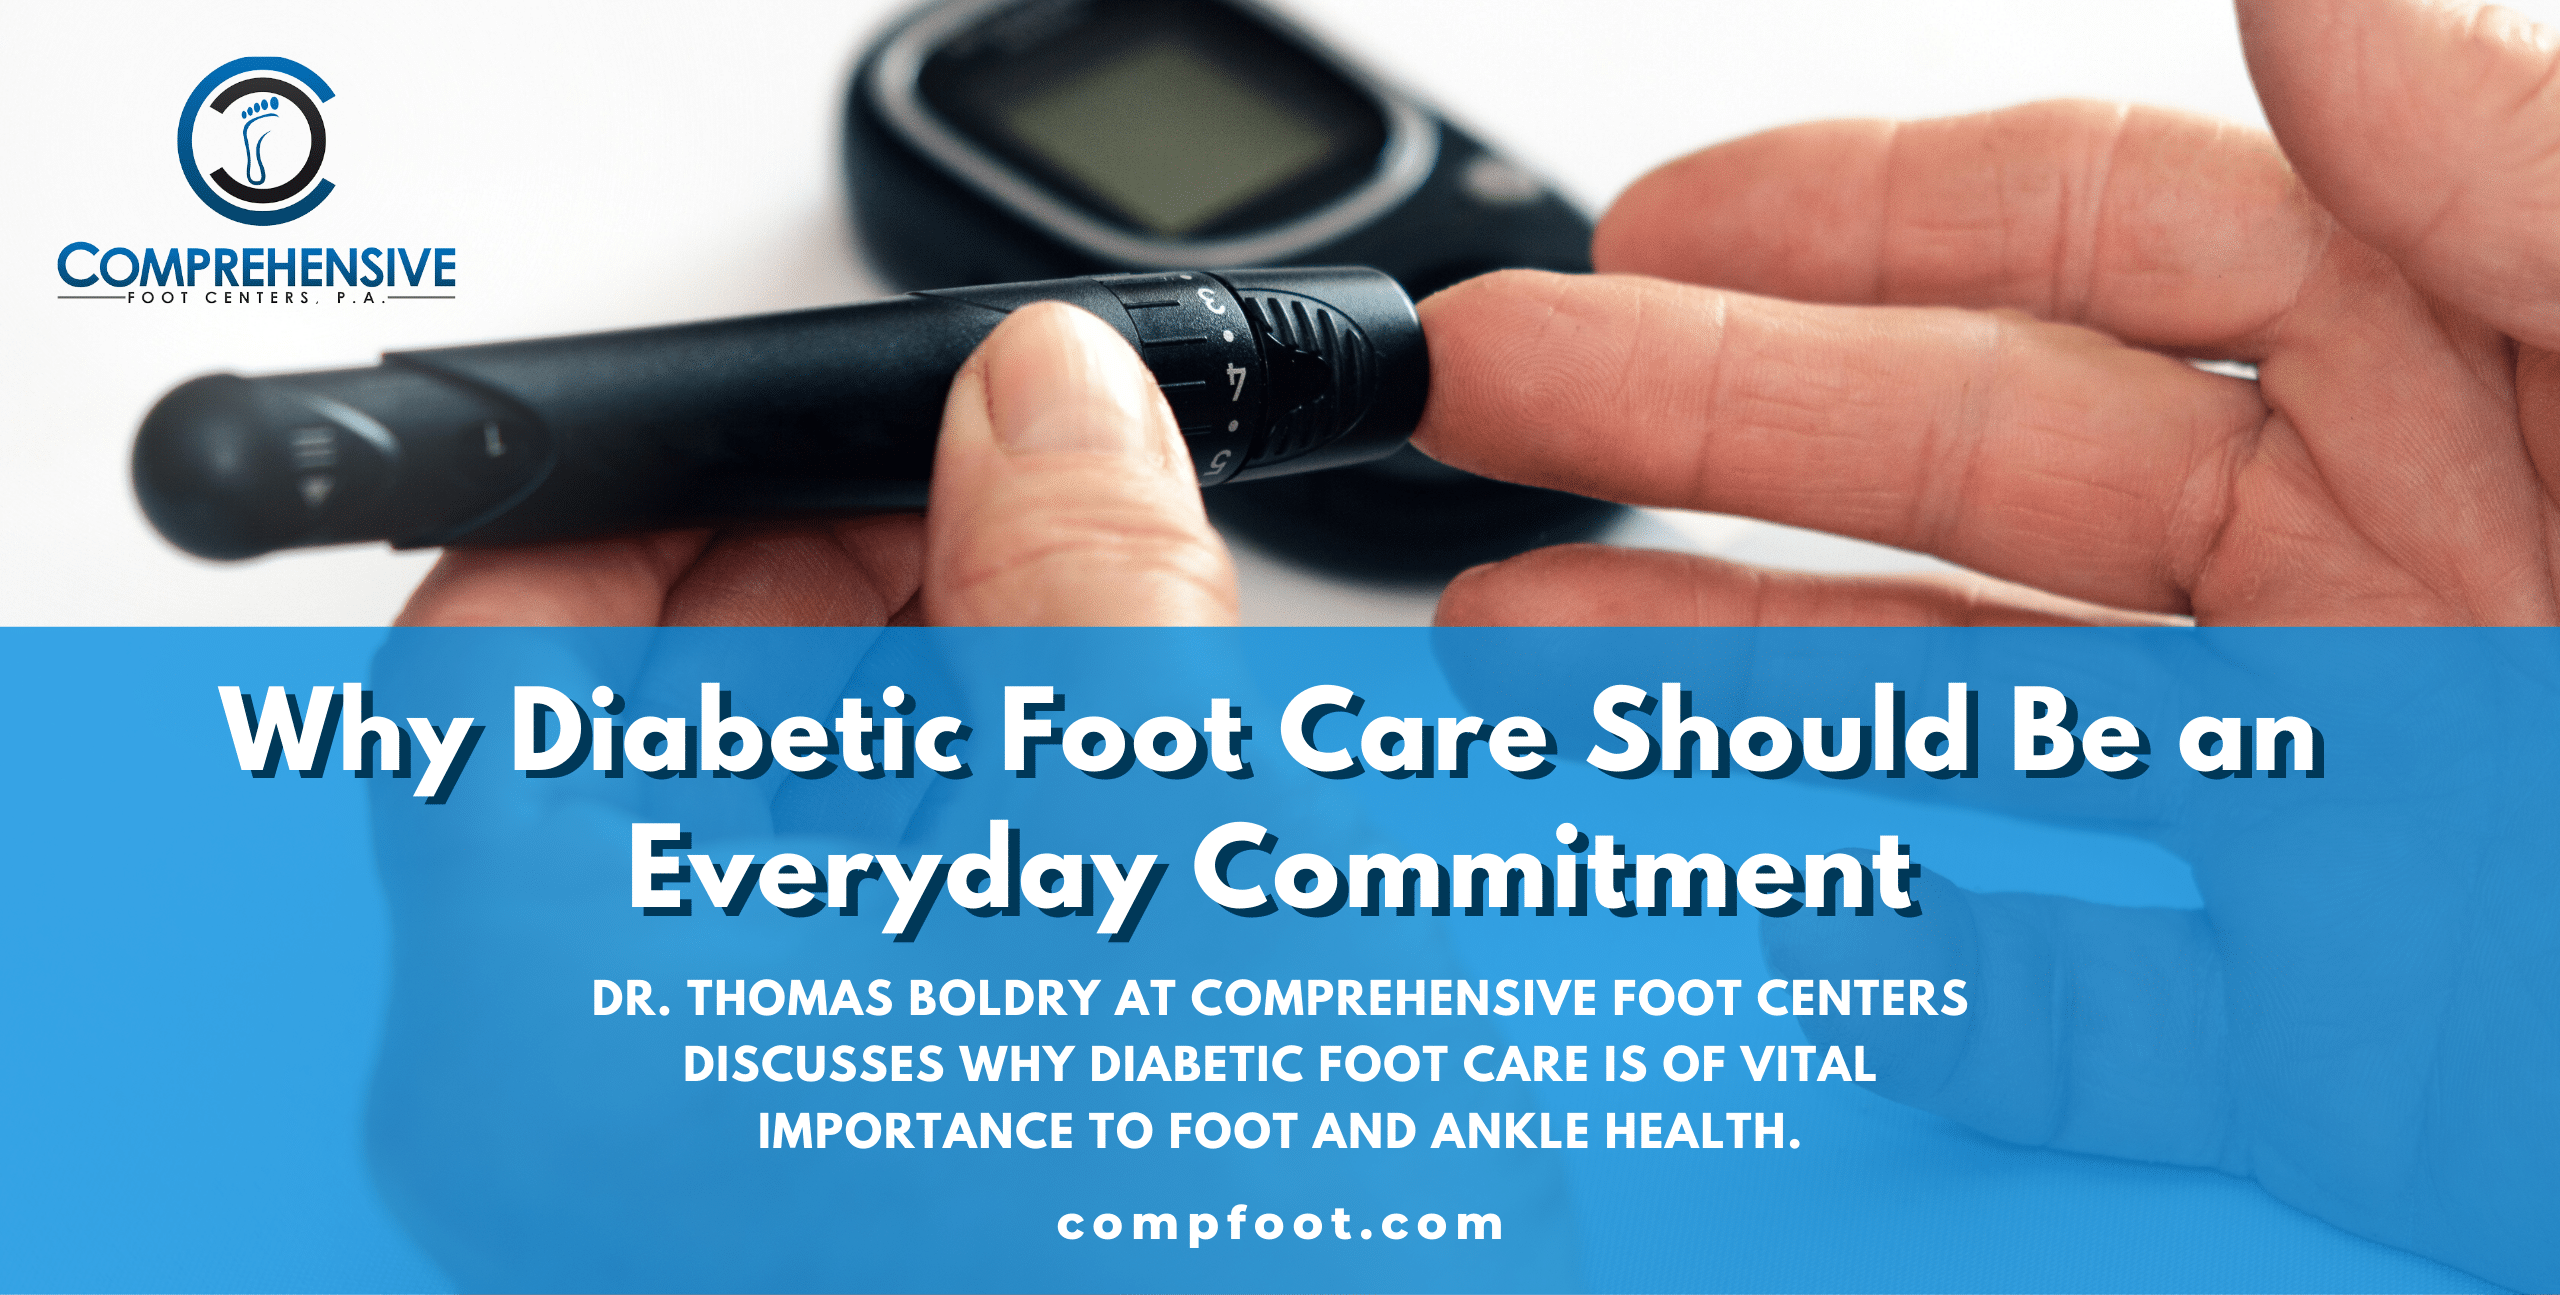 Why Diabetic Foot Care Should Be an Everyday Commitment